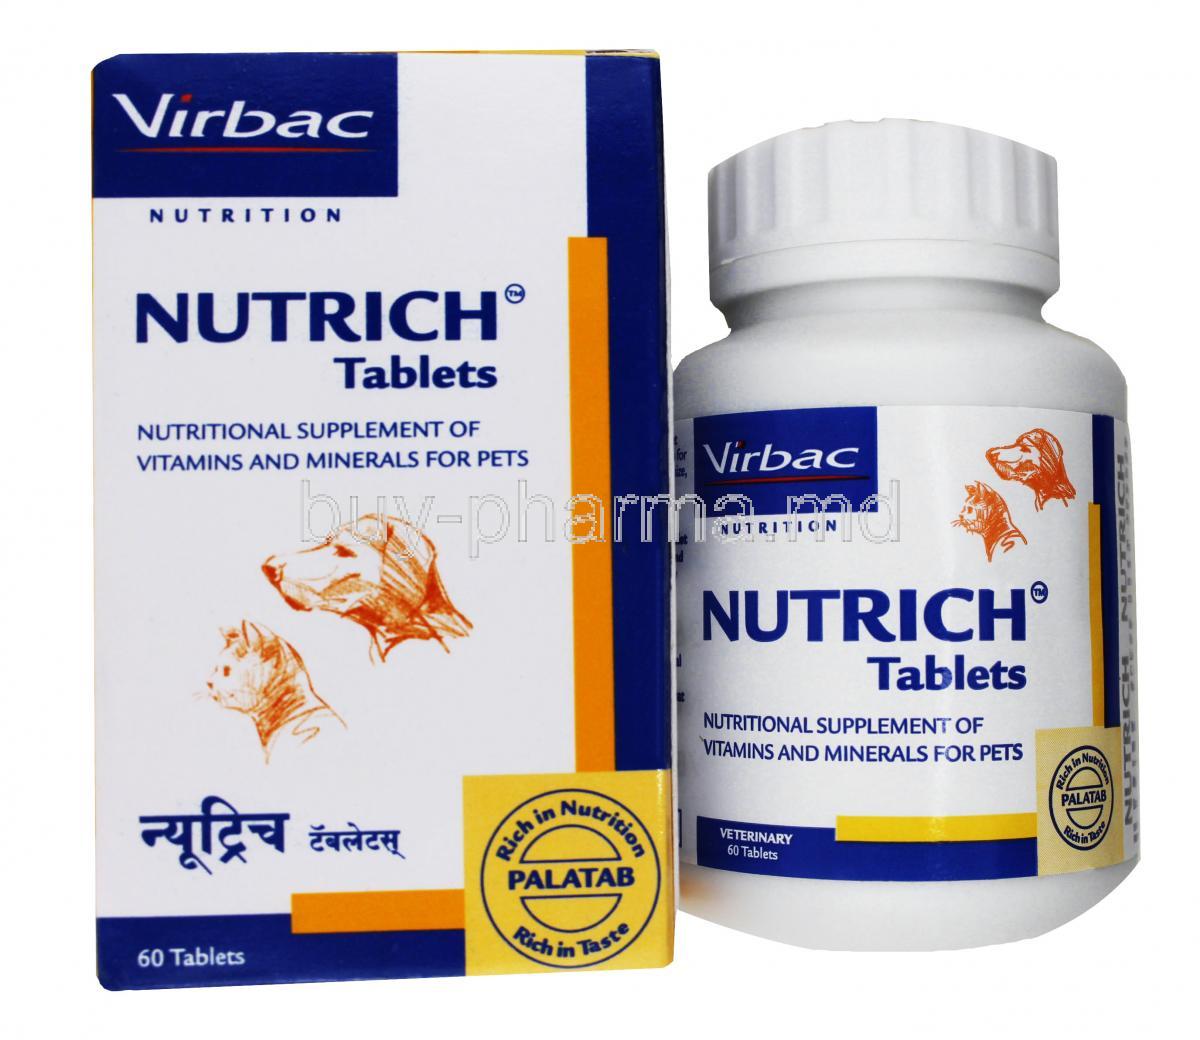 Nutrich, Tablet, Box and Bottle